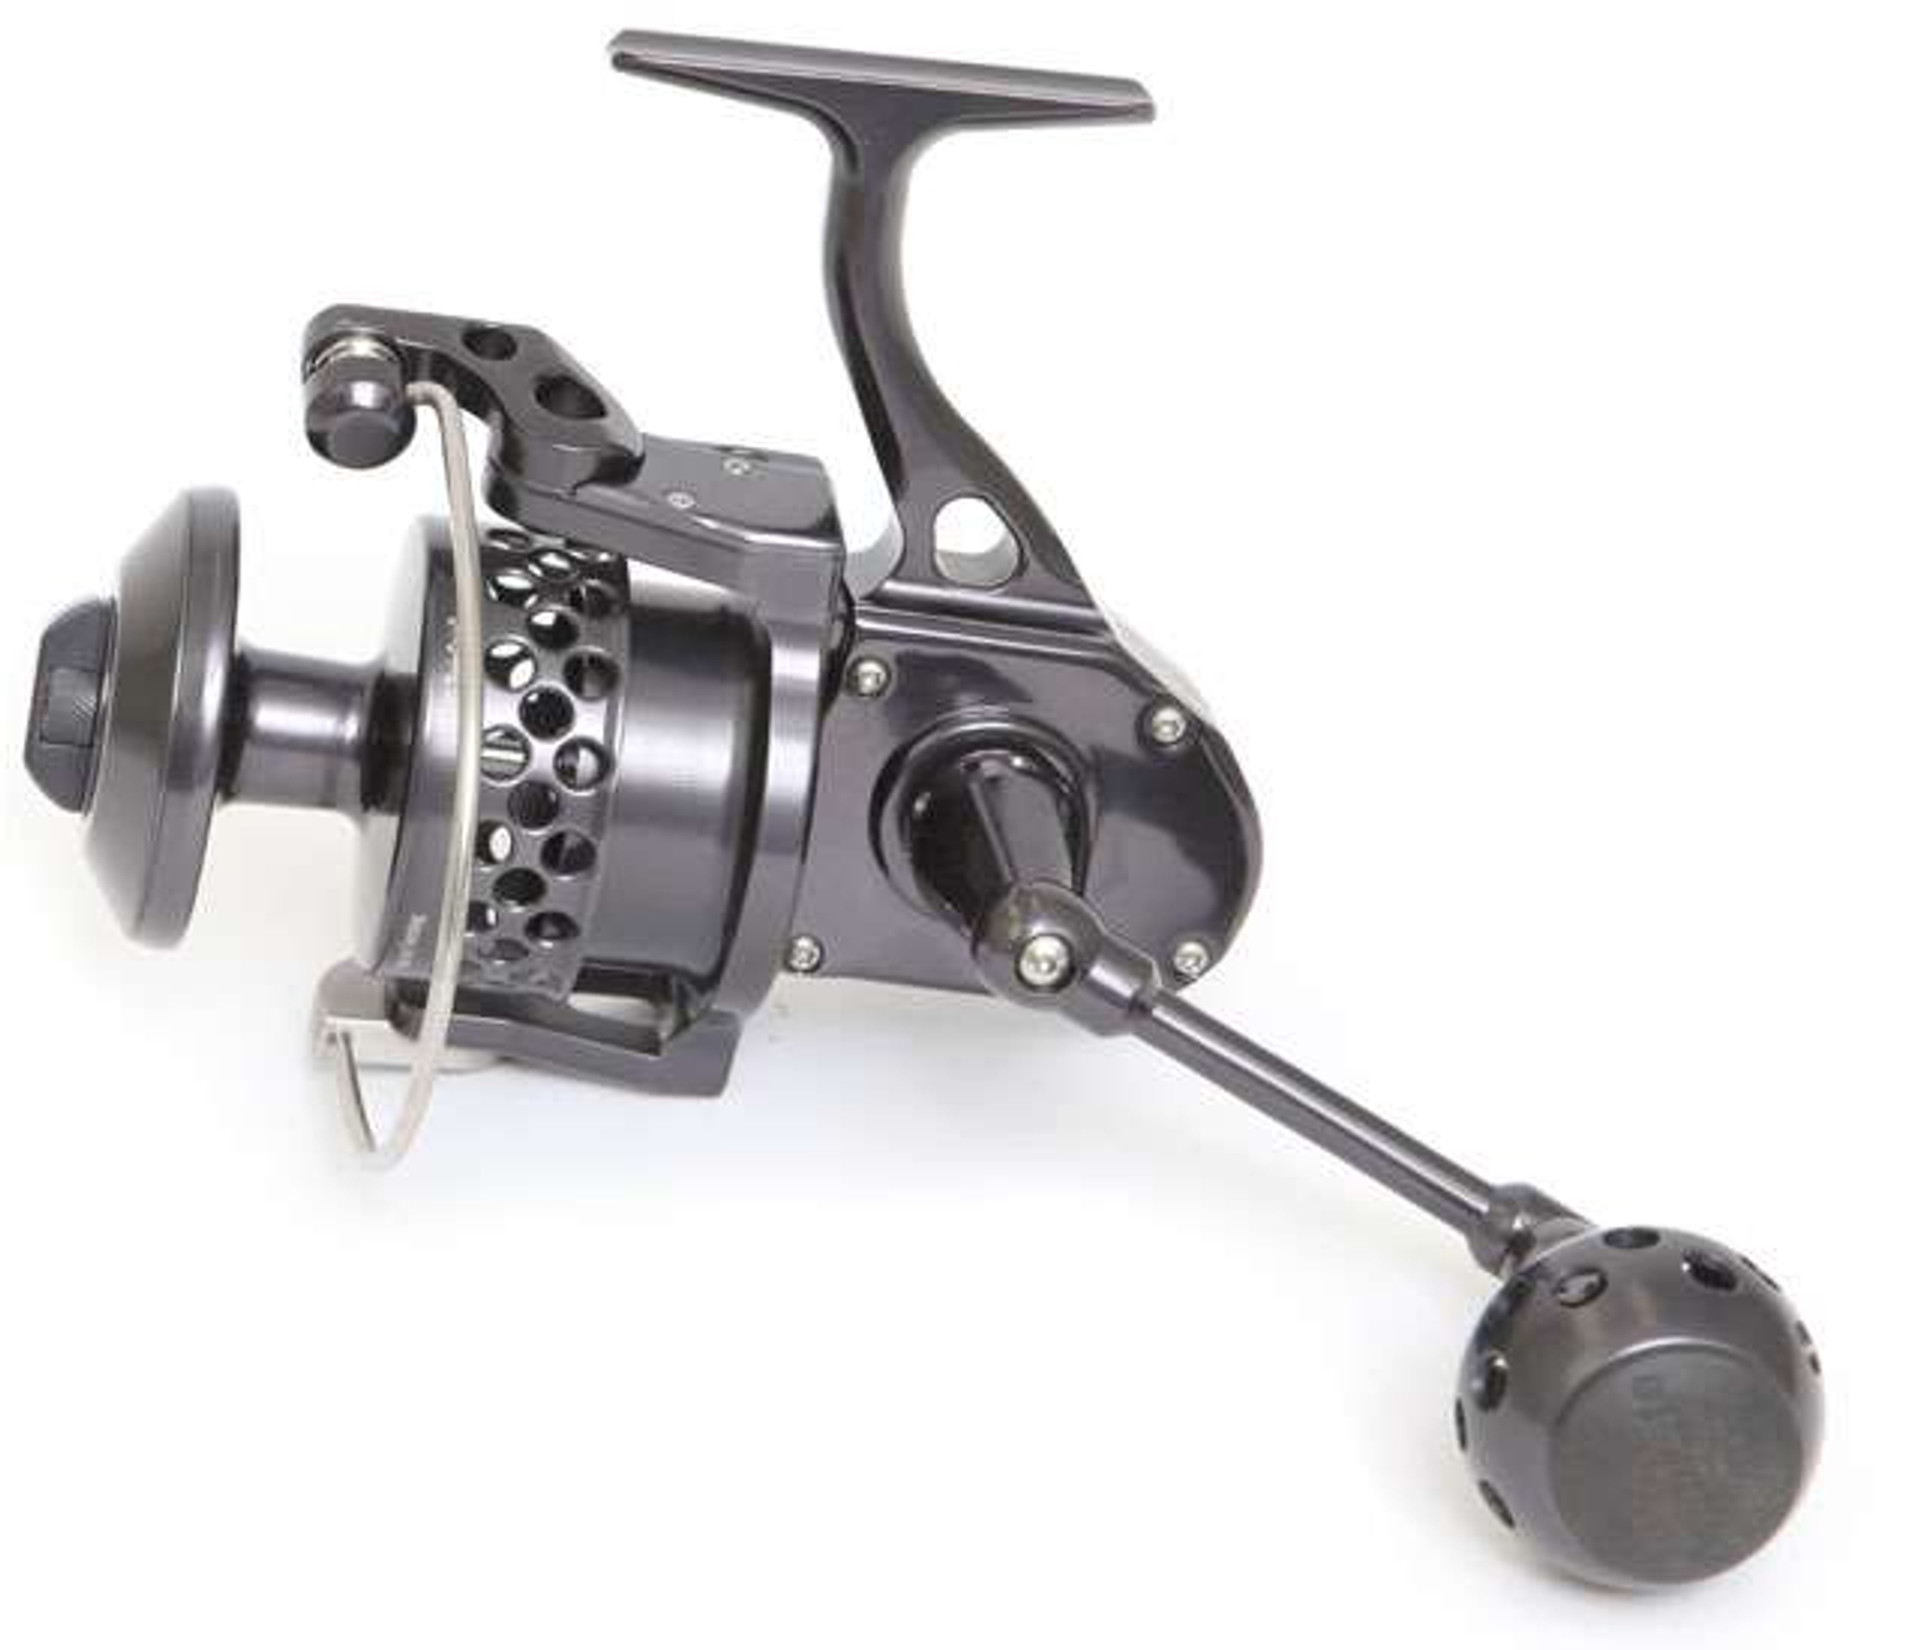 Accurate Twinspin spinning reel